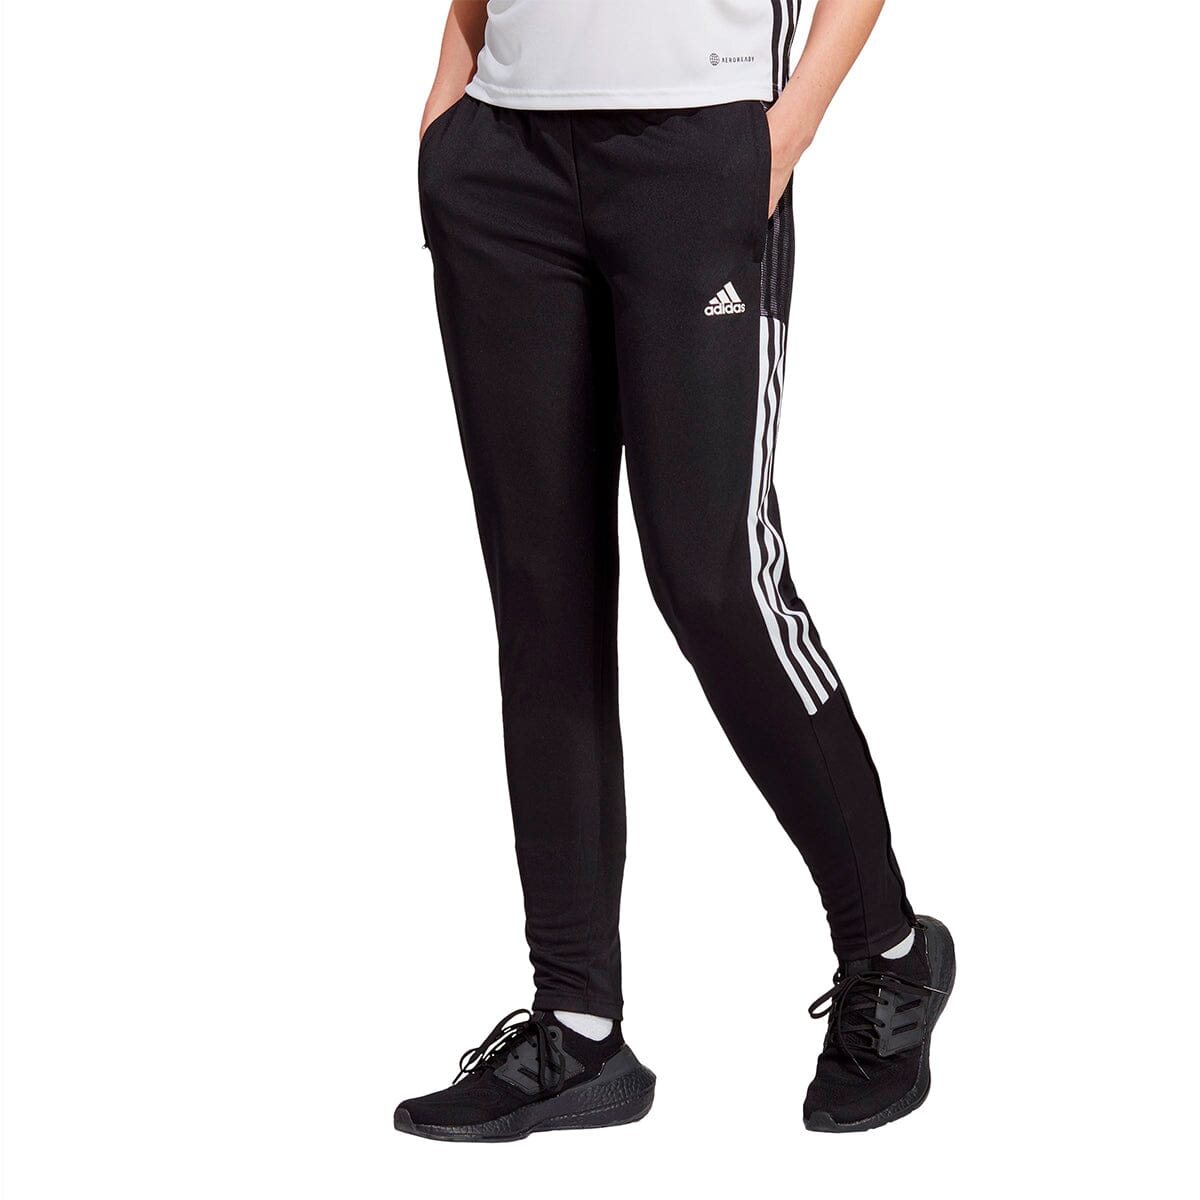 Adidas Gym Cuffed Pant Womens Fitness Pants - Pants - Fitness Clothing -  Fitness - All